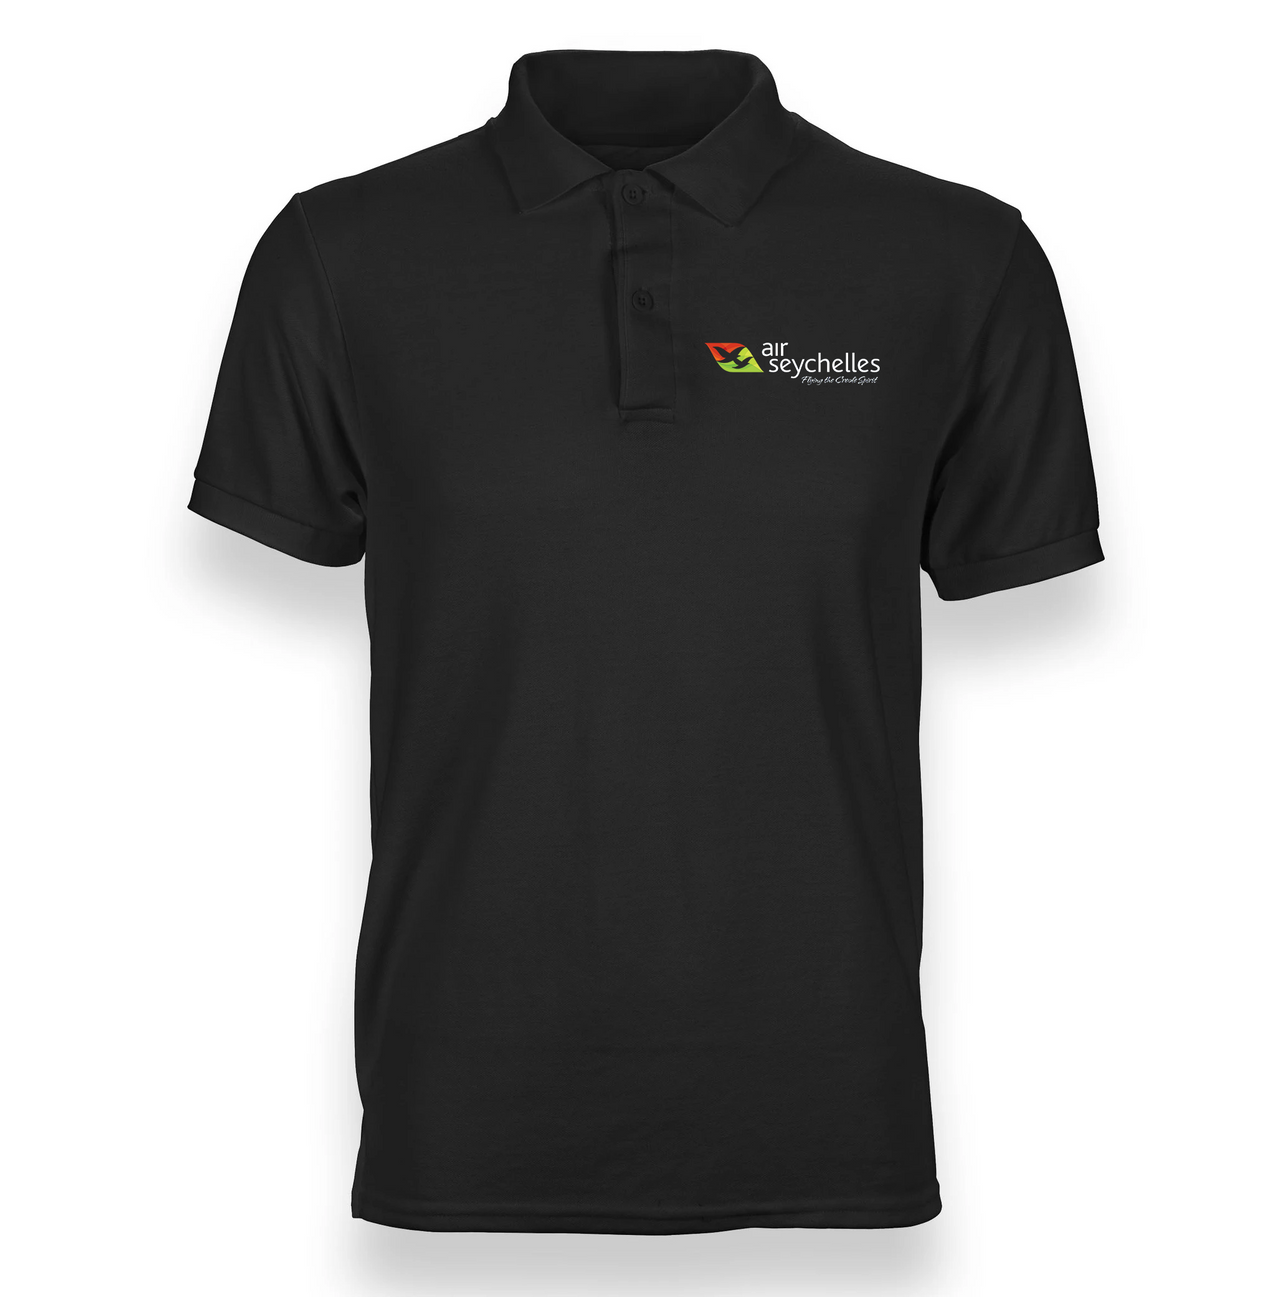 SEYCHELLES AIRLINES POLO T-SHIRT